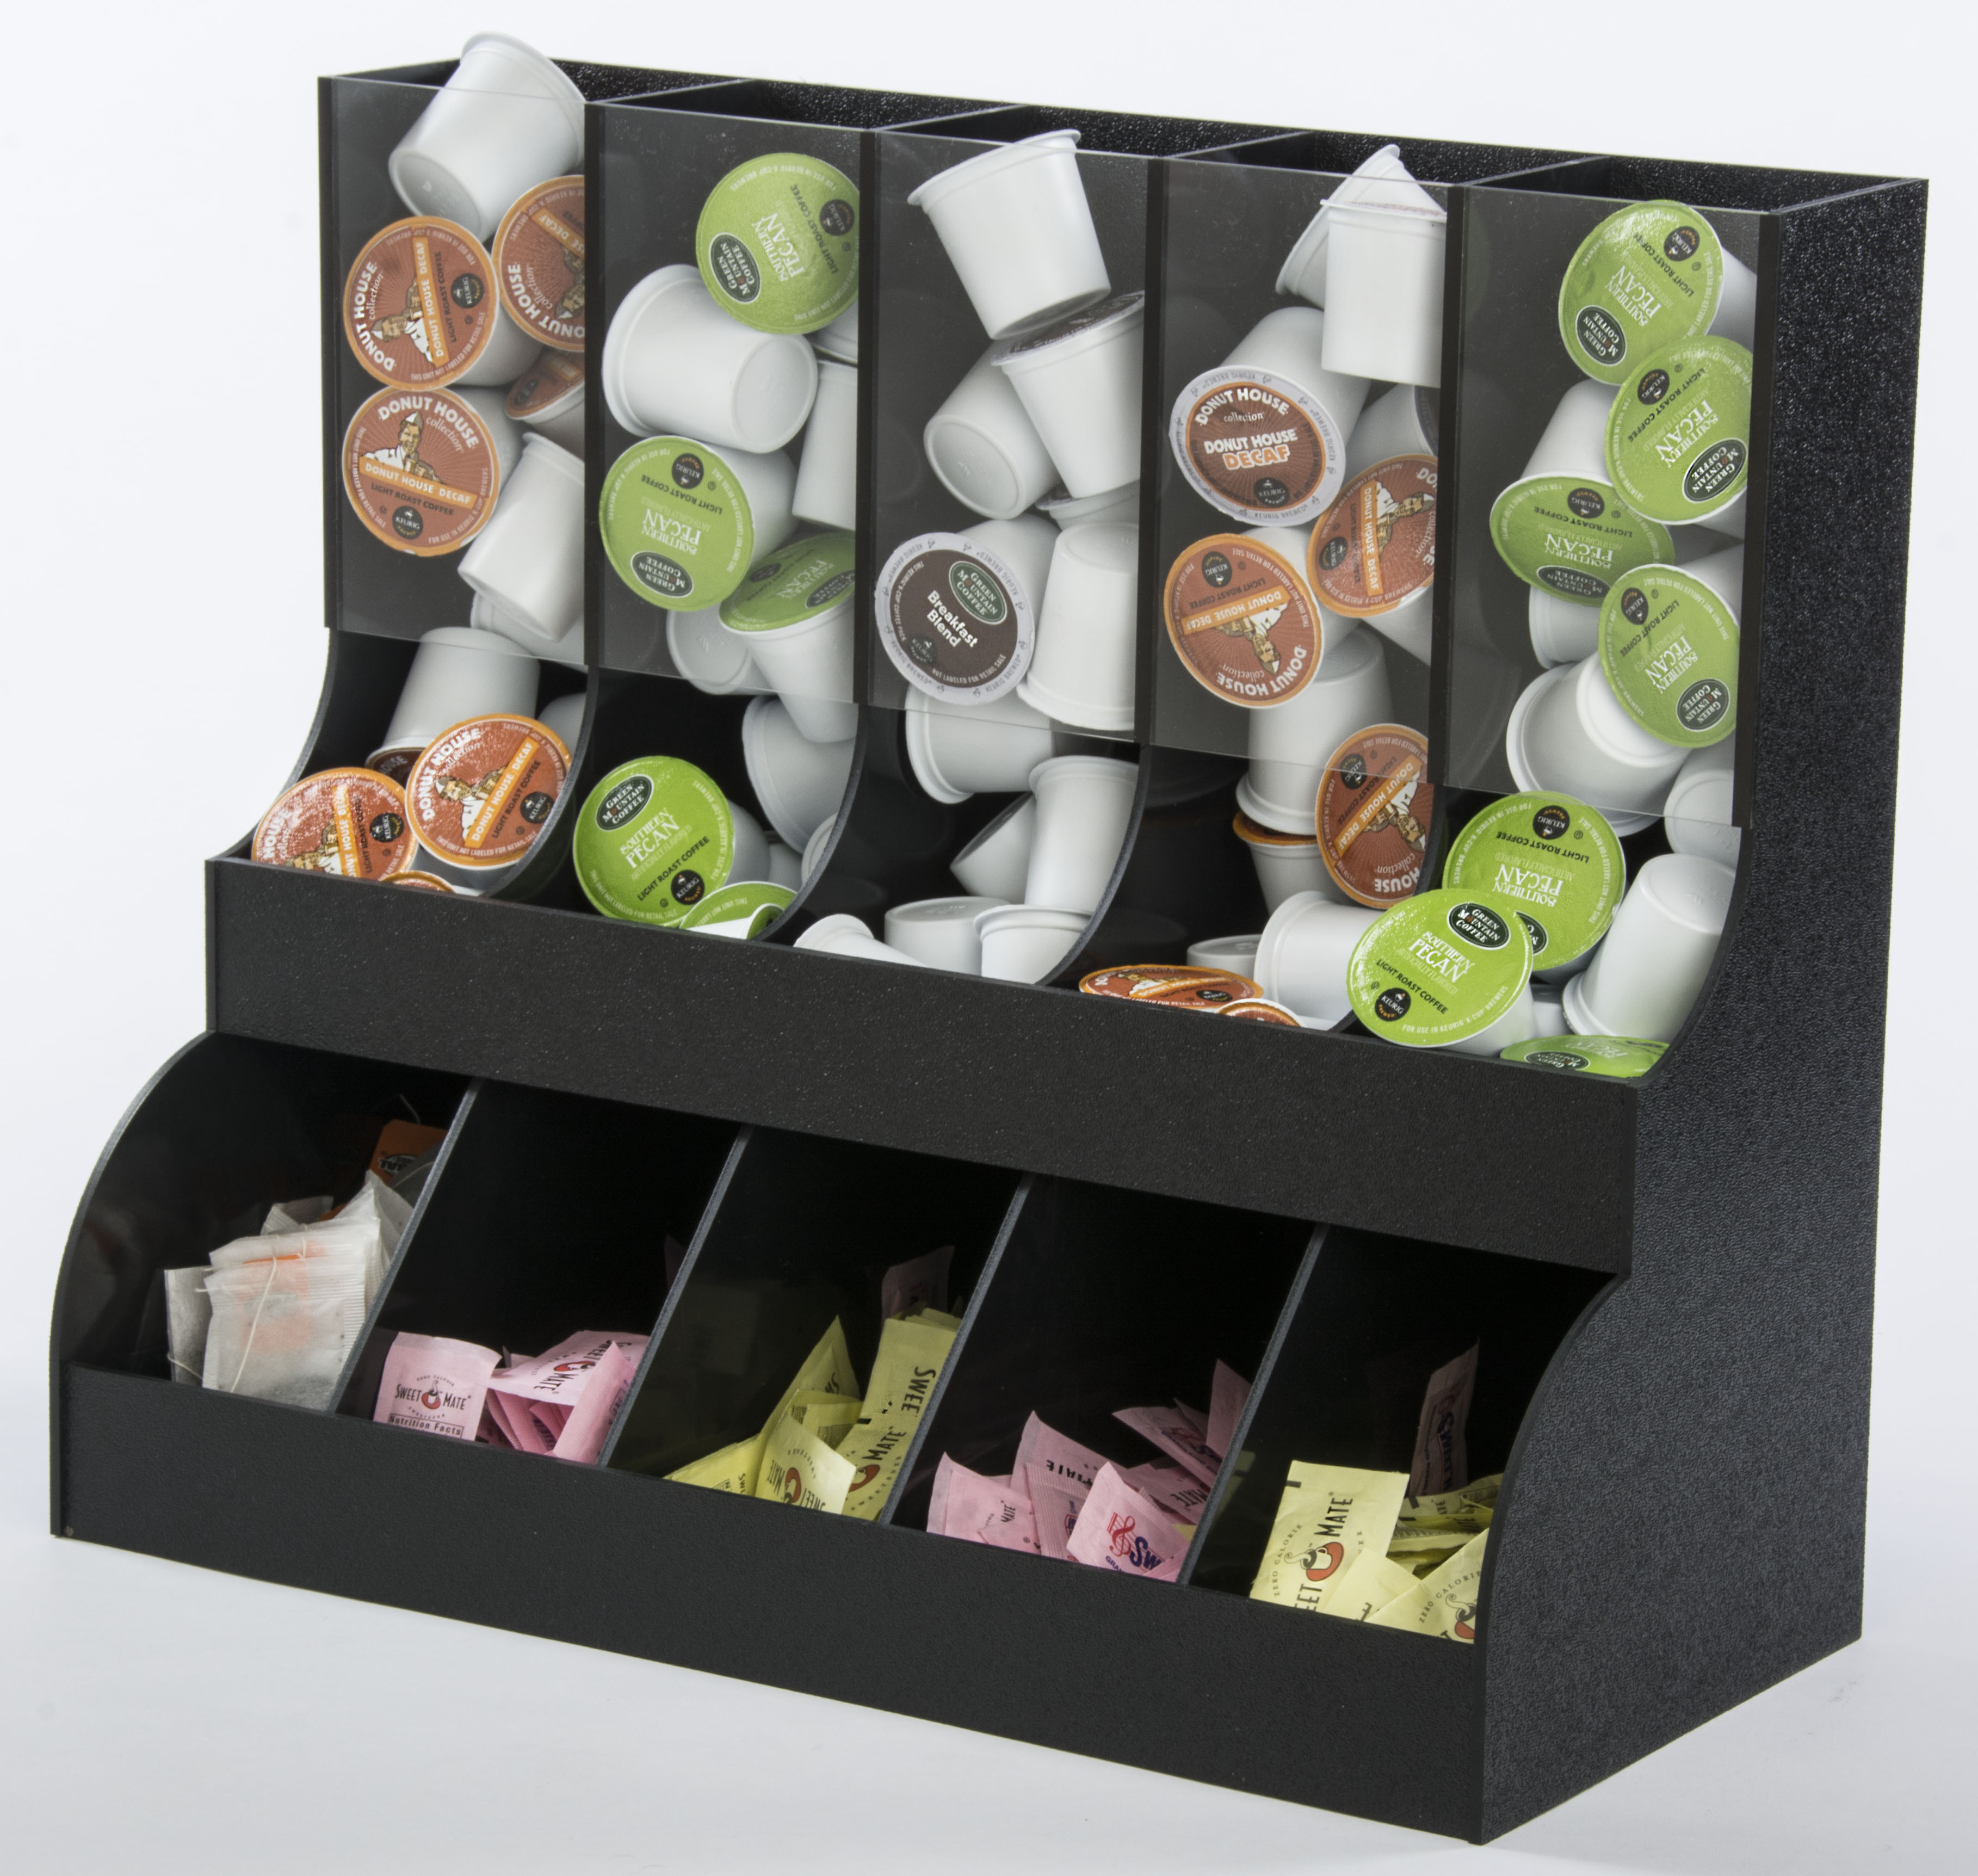 OnDisplay Acrylic 2 Section Flip Top Storage Bin for Coffee  Pods/Candy/Tea/Bulk Items - Office/Home/Retail Store Display Organizer -  Vandue